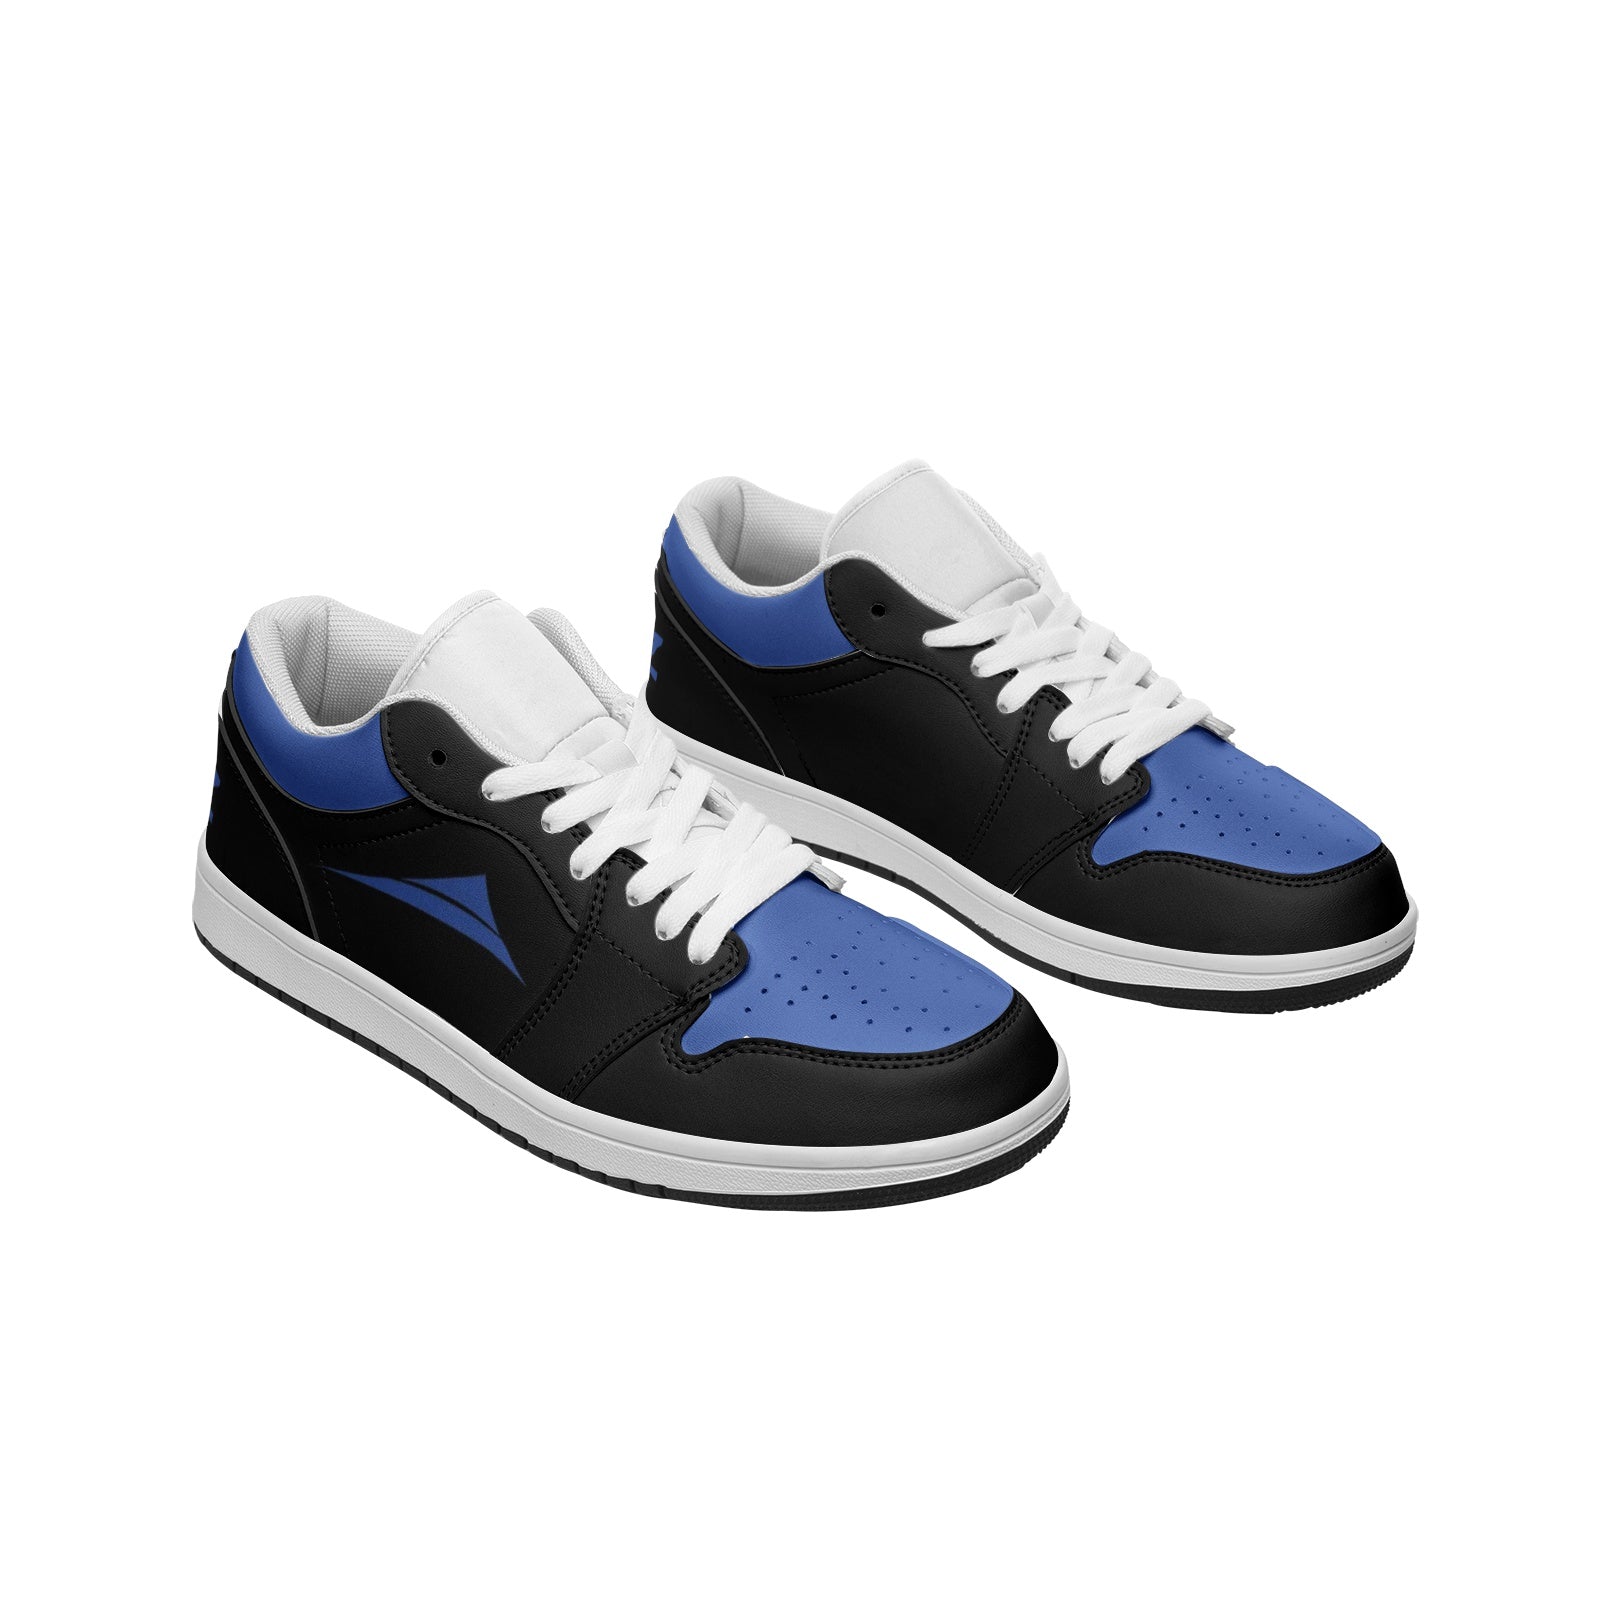 2021 Runners Shoes Mens Designer V.N.R Sneaker Blue Black Casual Leather  Sports Luxury Men Women Breathable Tennis Trainers With Box NO5 From  Tbtgroup, $75.72